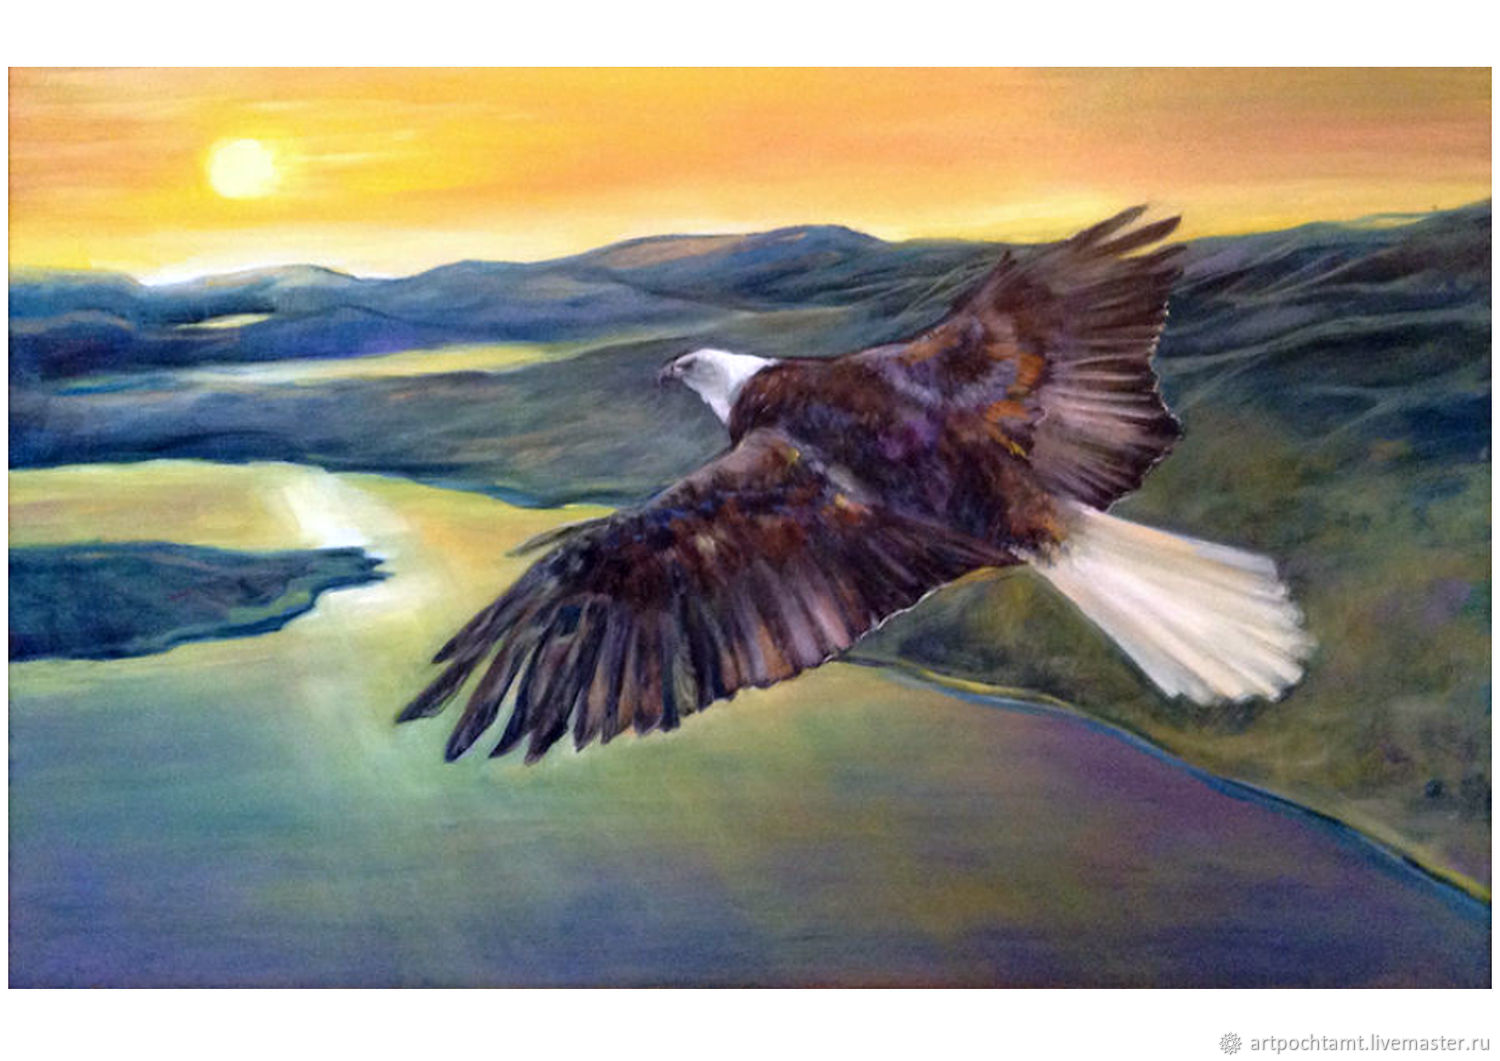 Soaring Eagle Painting - Sunset Landscape Bird River Mountains, Pictures, M...